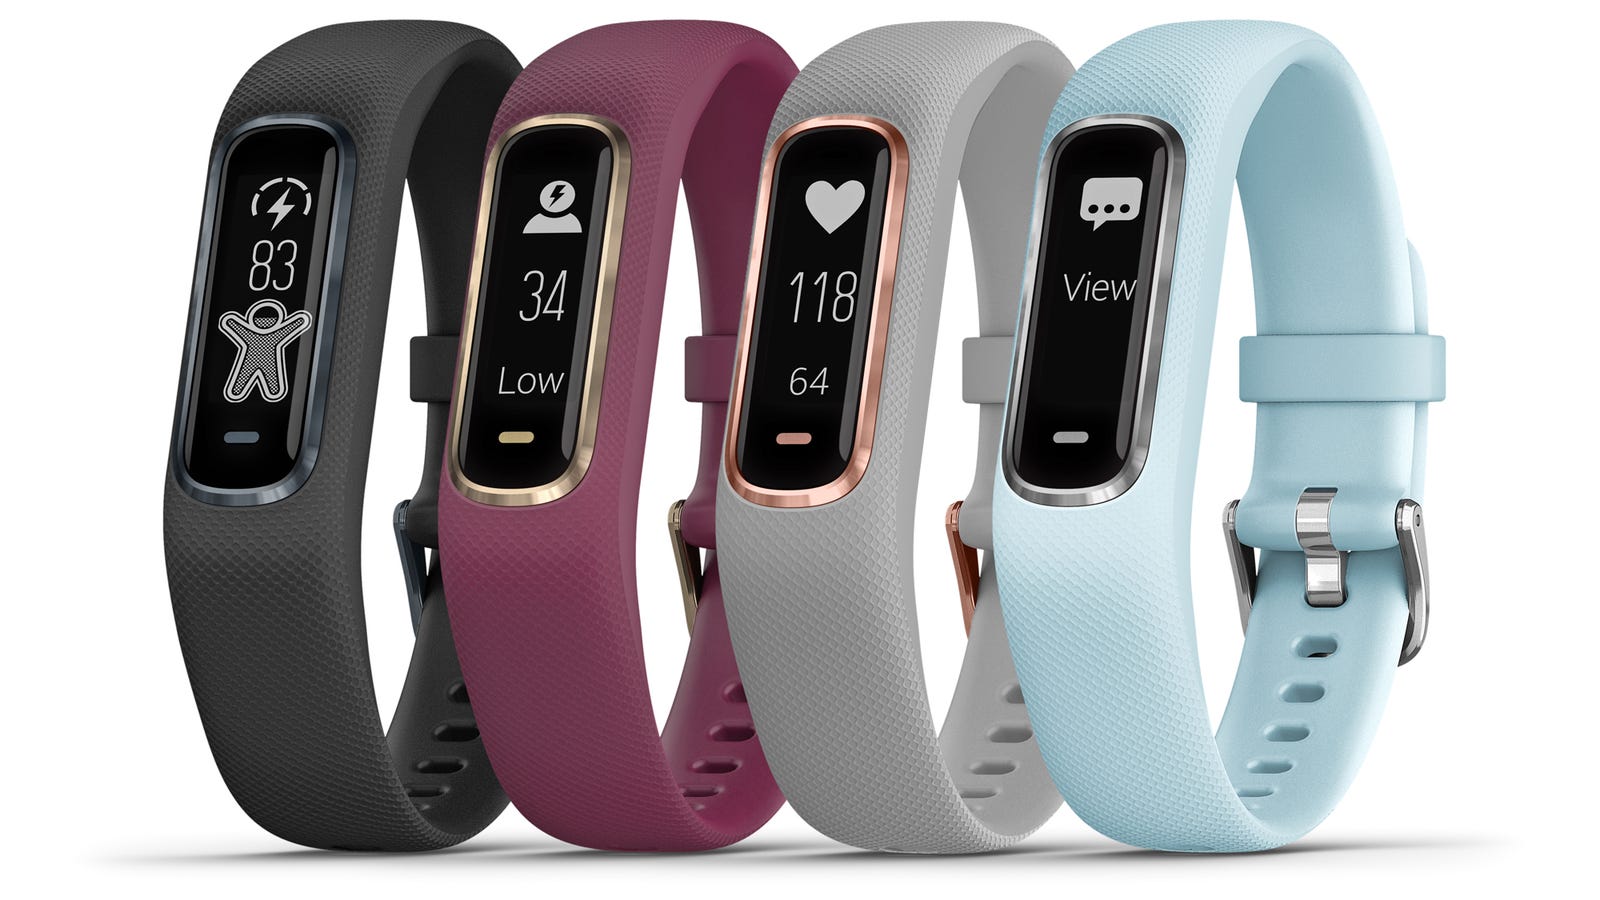 Garmin's New Fitness Tracker Has a 'Body Battery' Feature ...